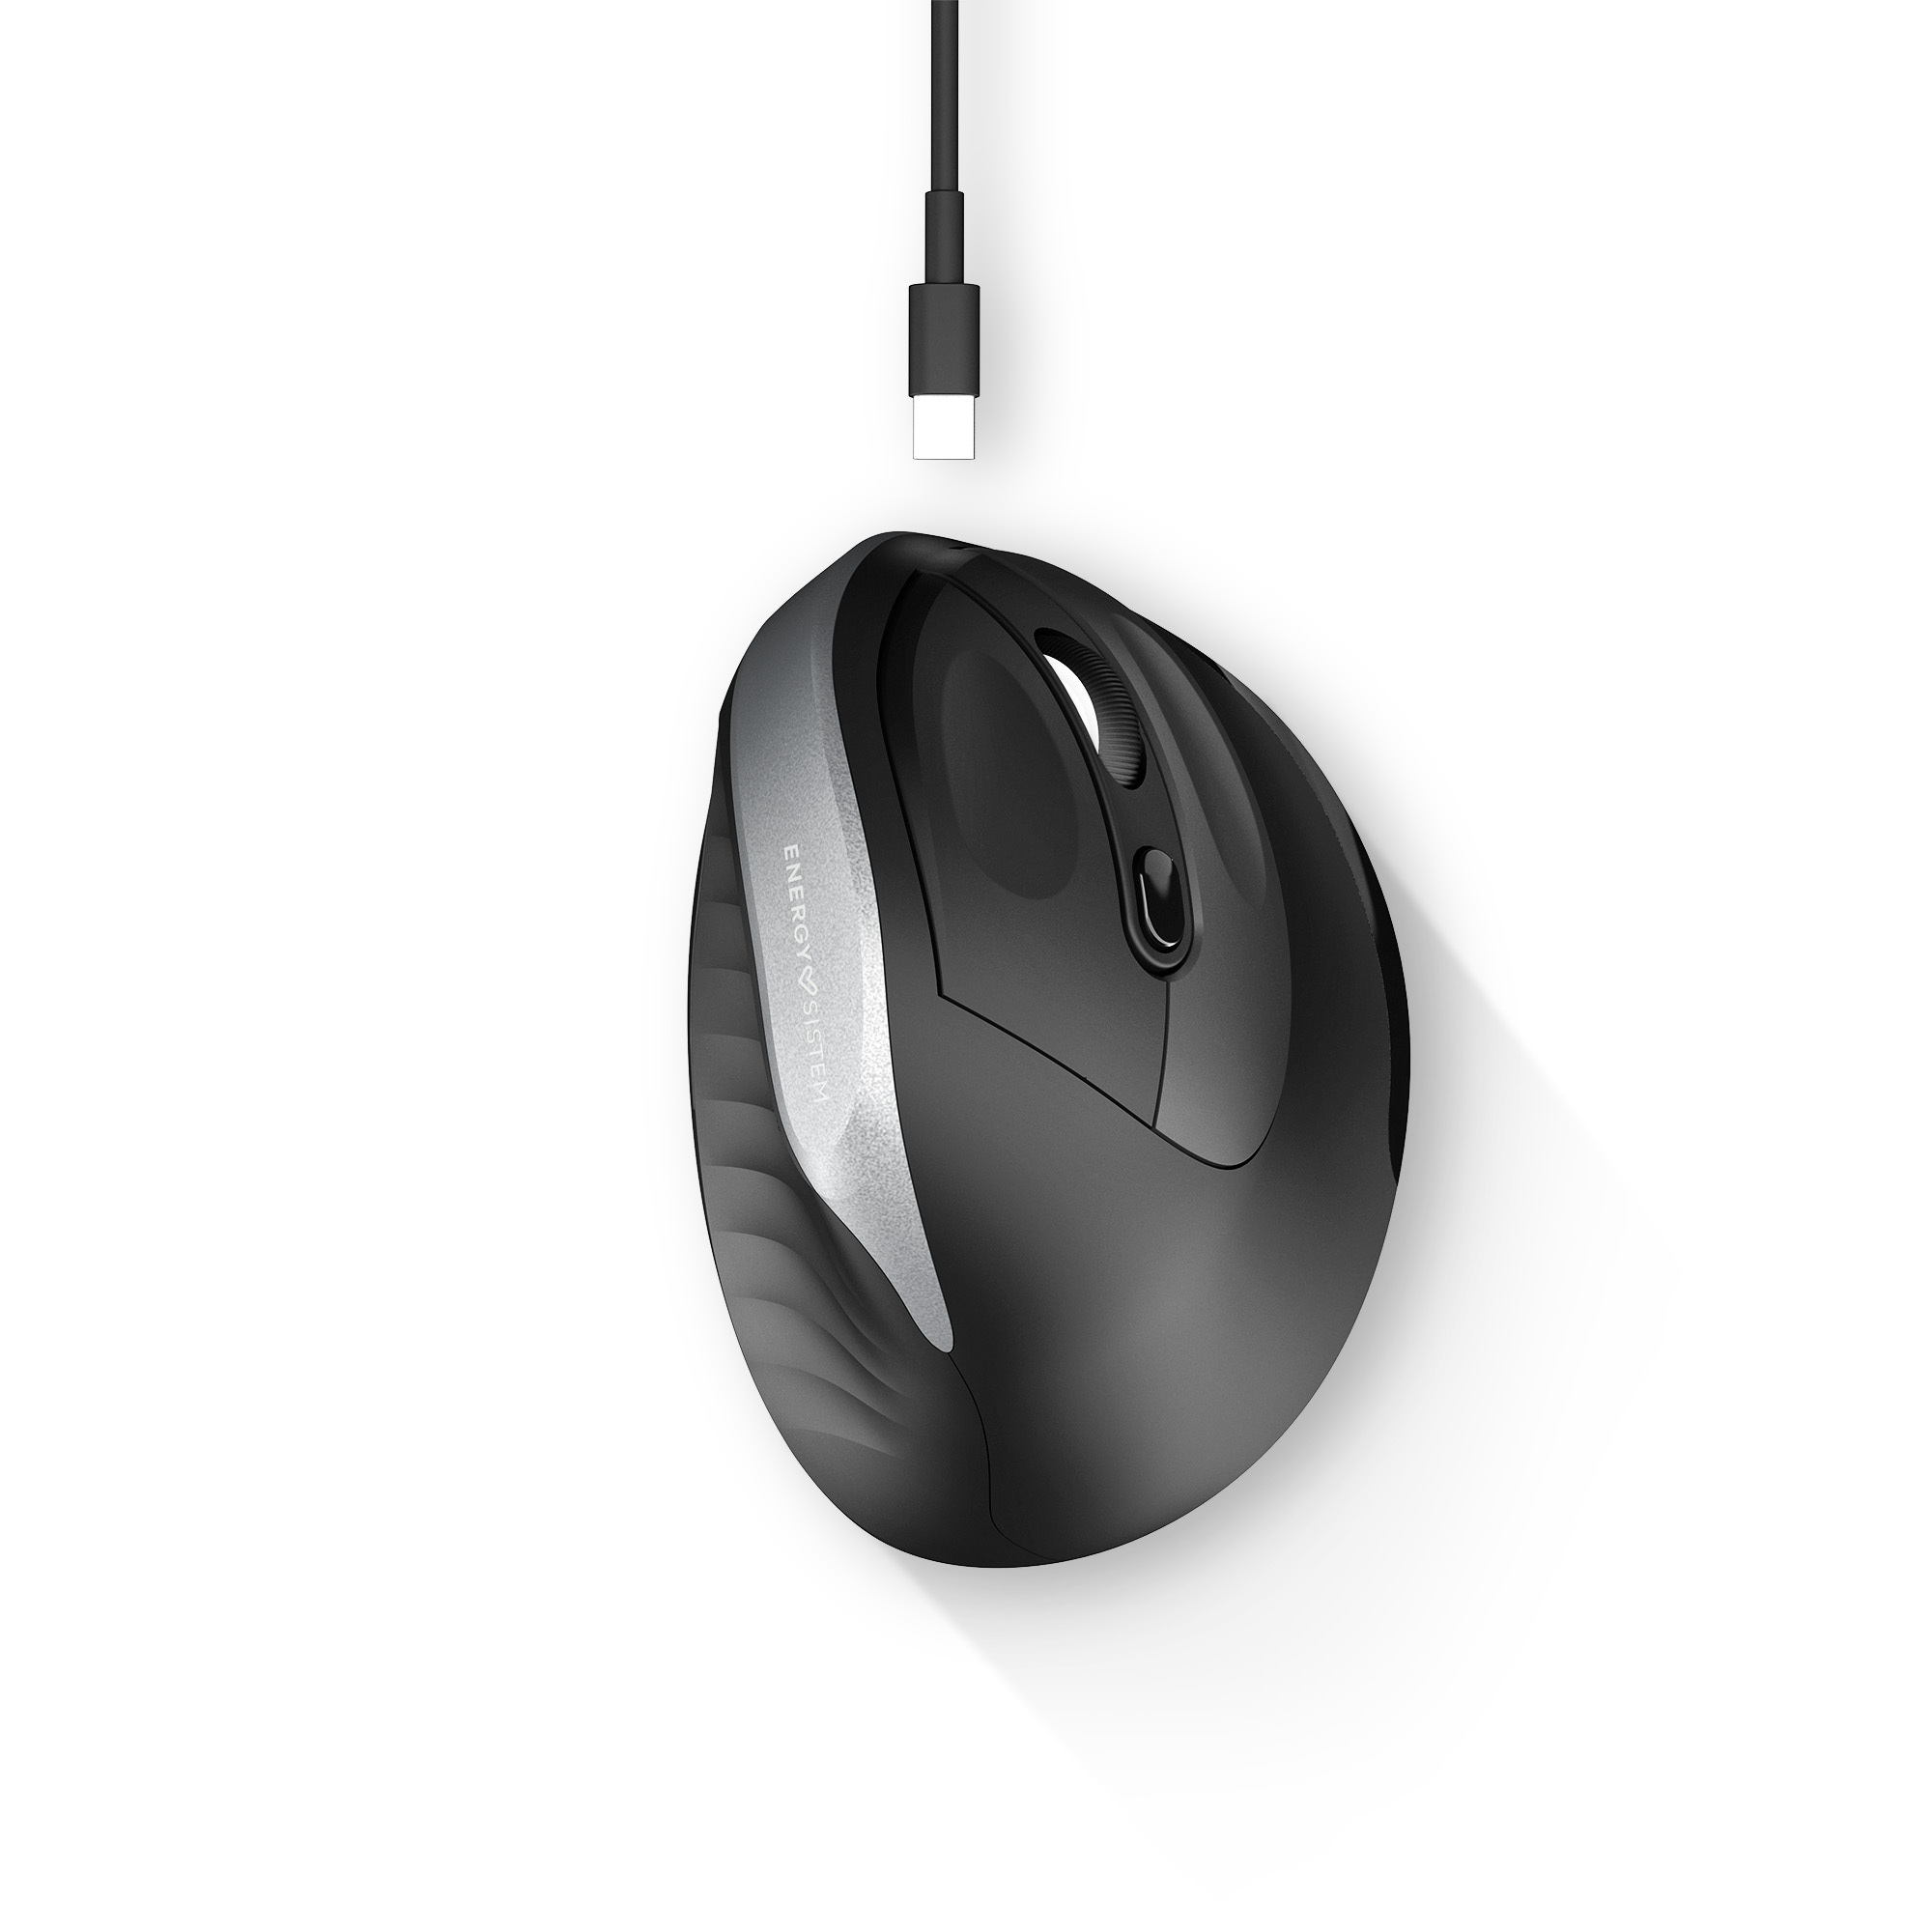 Ergonomic mouse with plug-and-play RF wireless connection